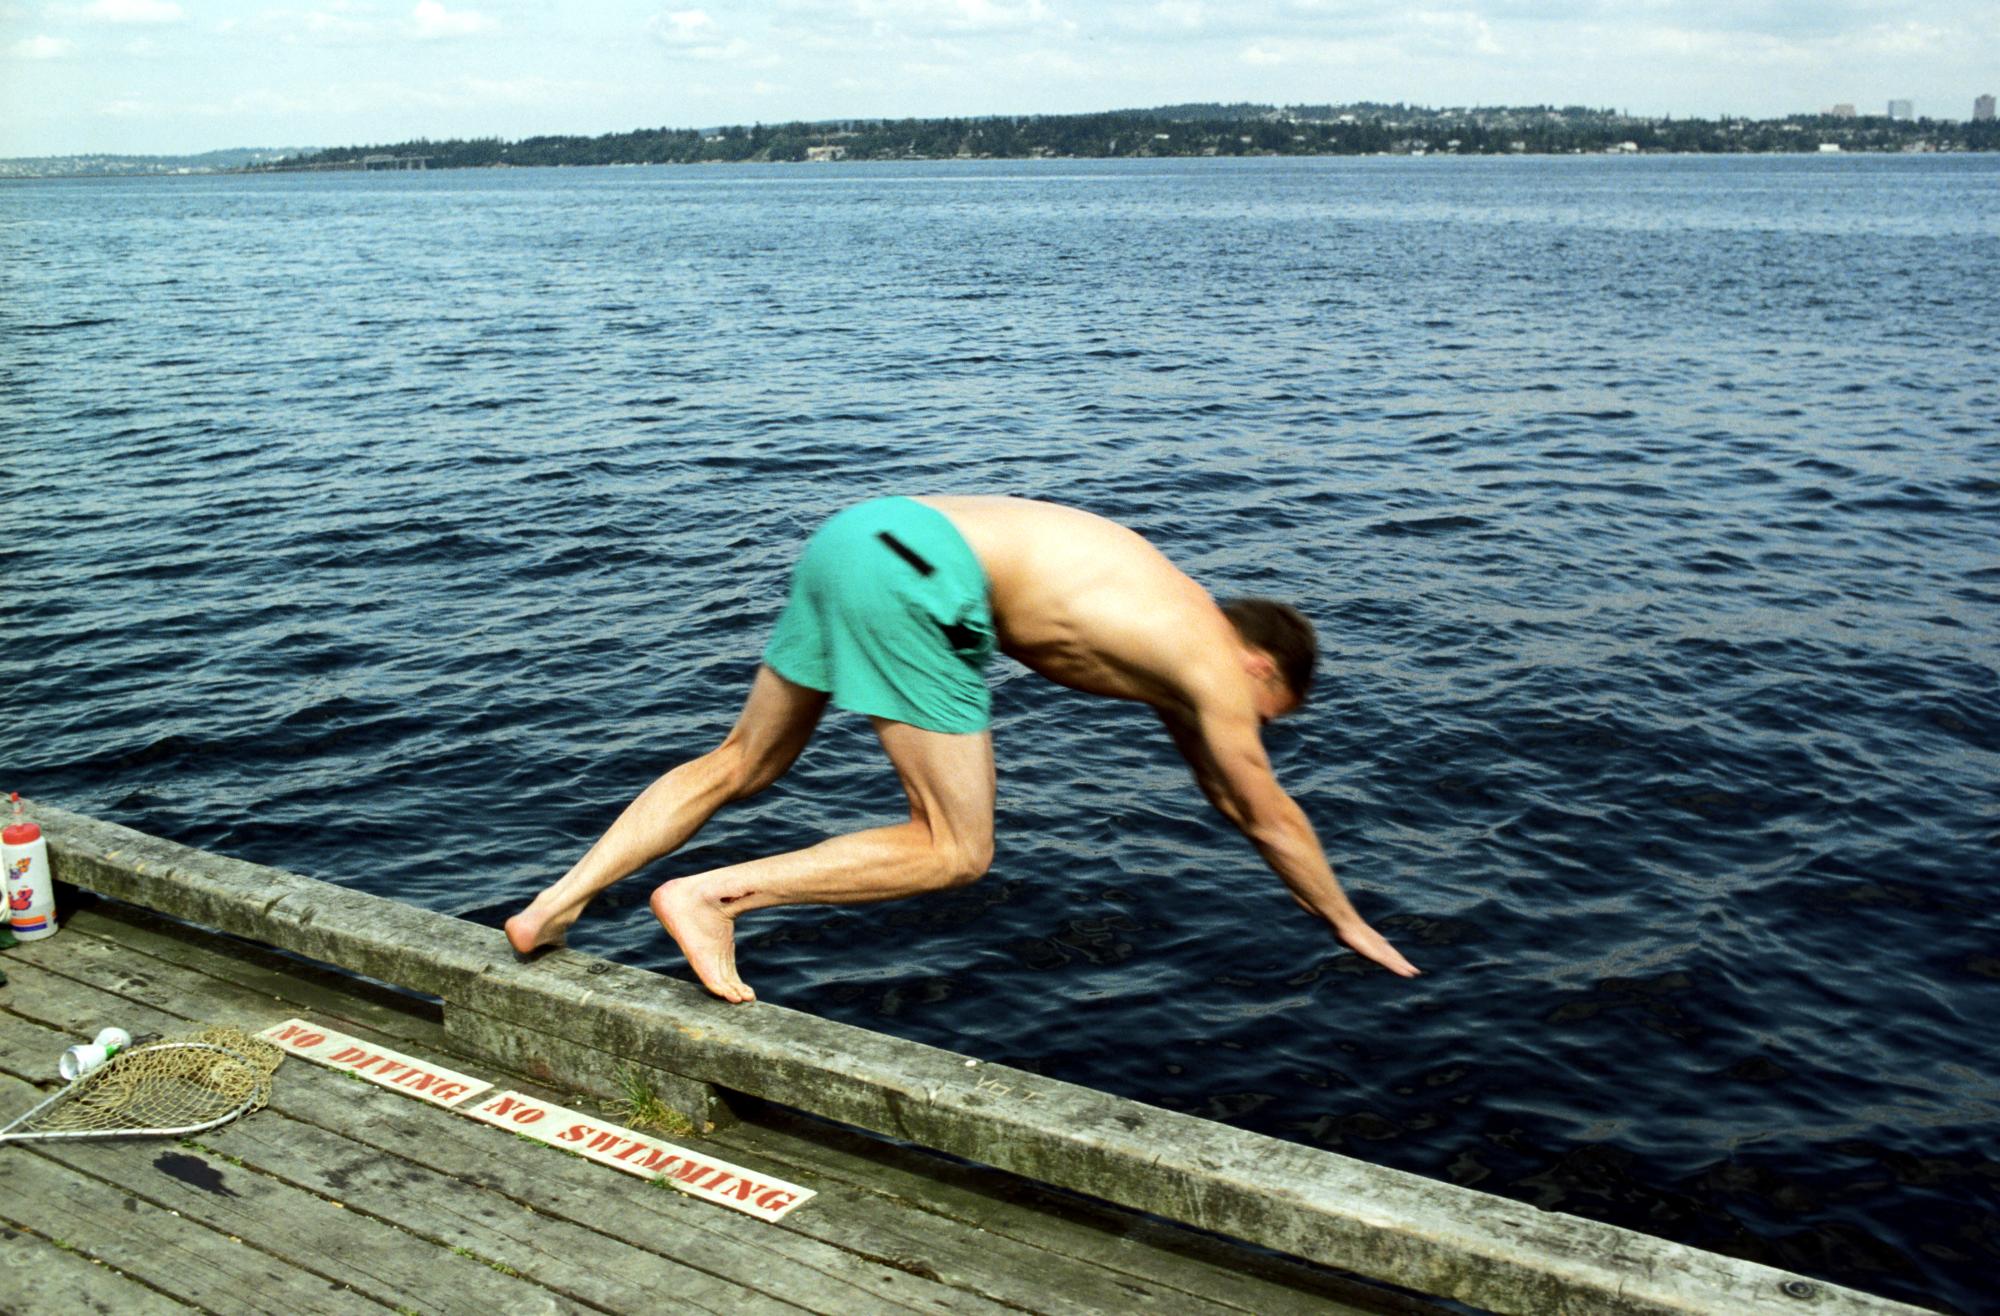 Seattle (1993) - No Diving No Swimming